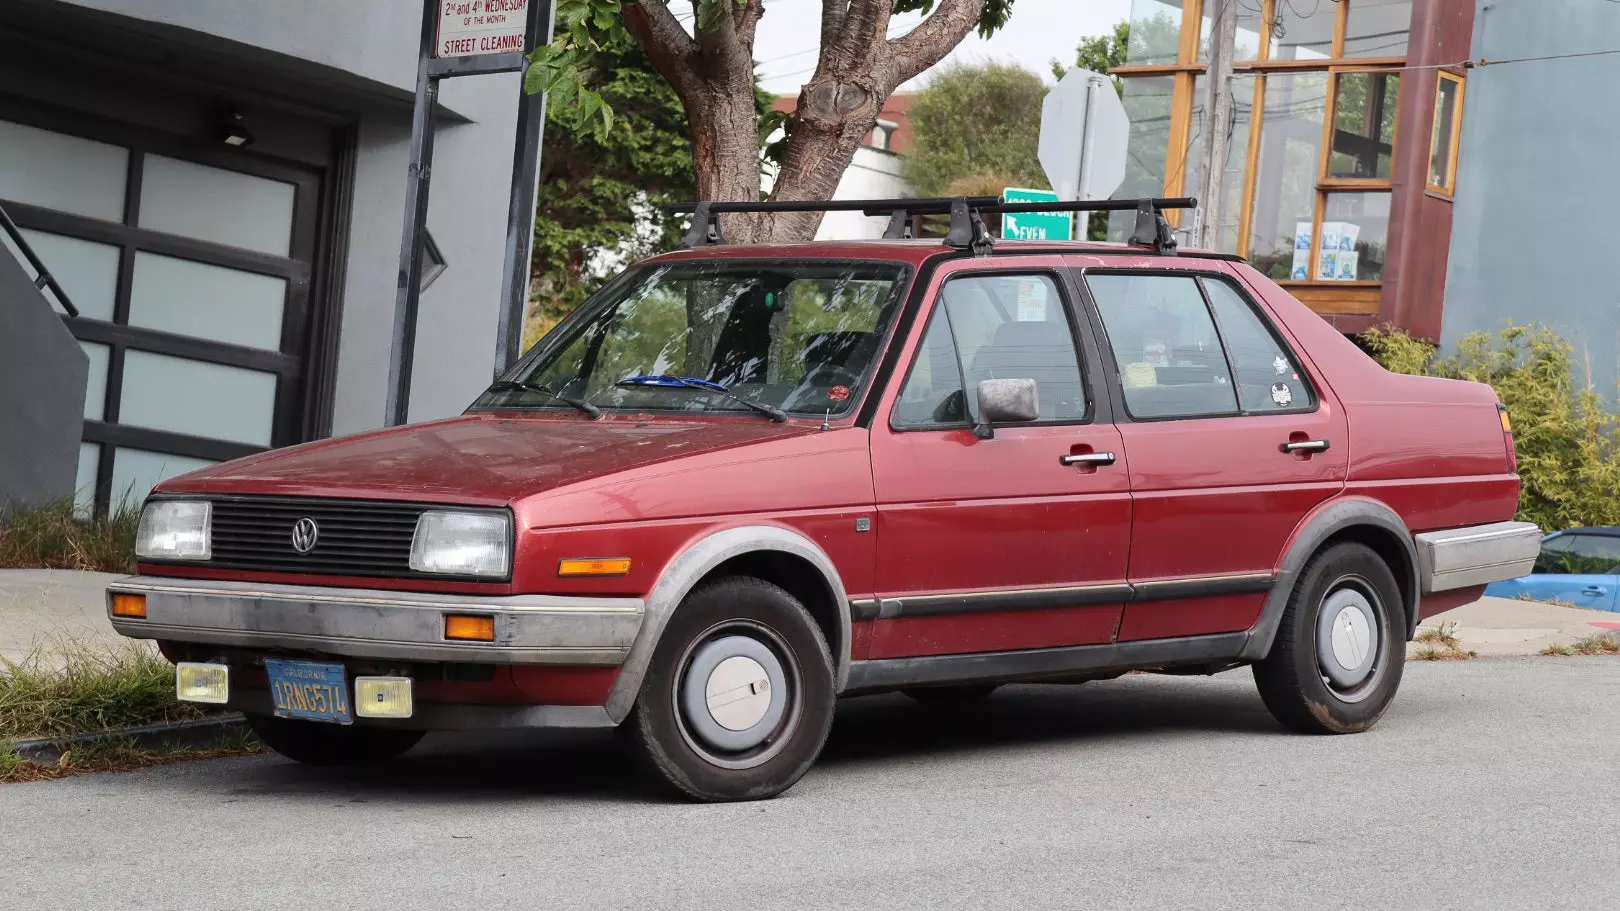 Look at This Incredibly Clean Mk2 Volkswagen Jetta Just Parked on the Street | Autance